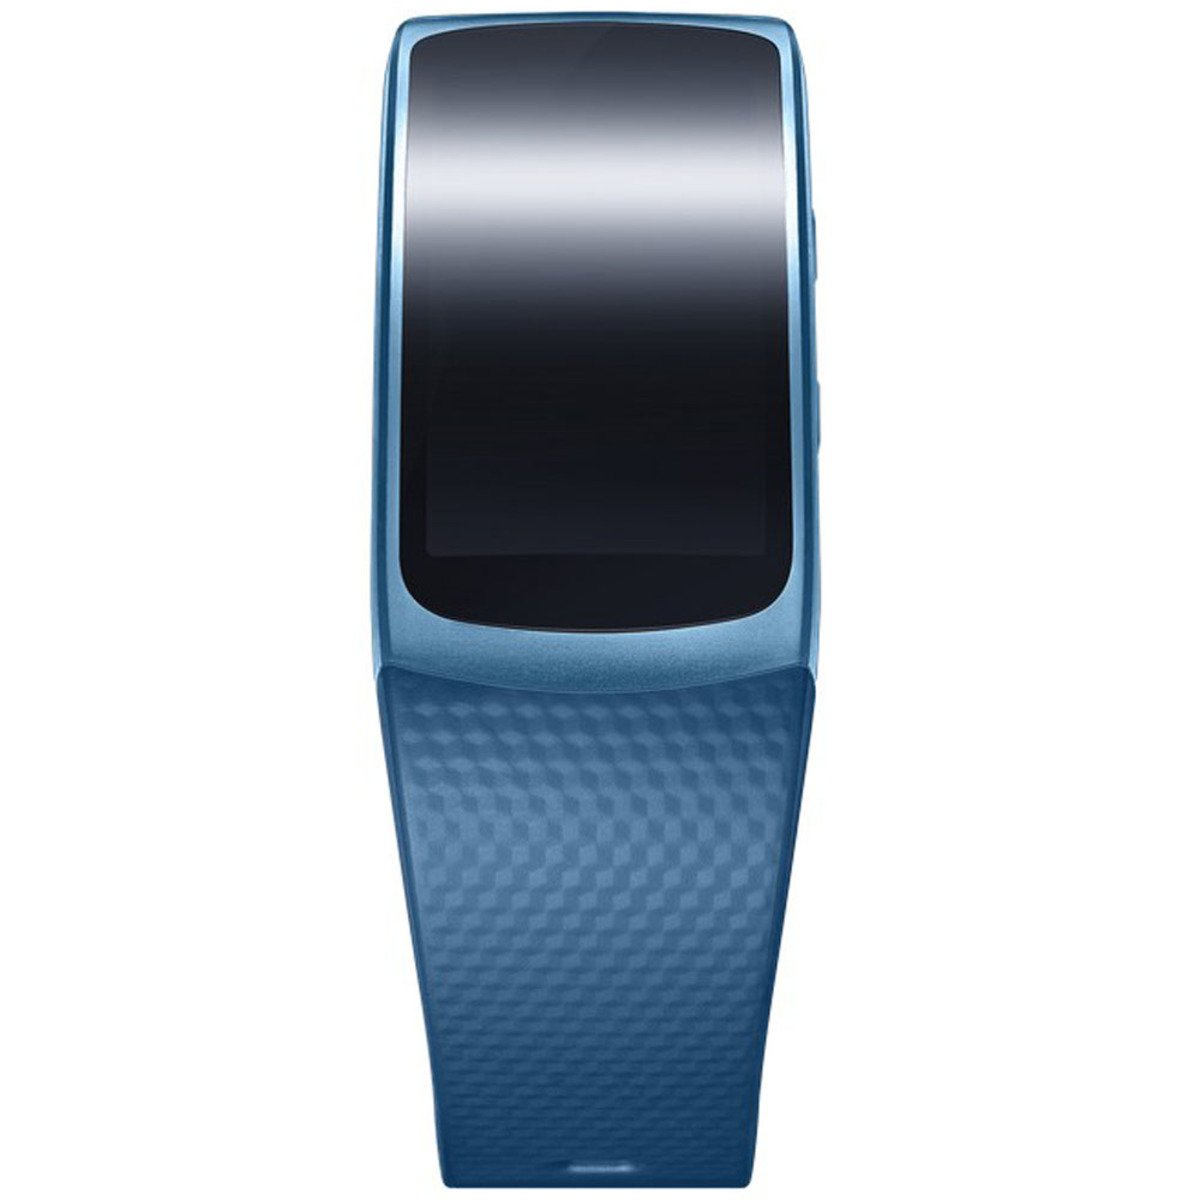 Samsung Gear Fit2 GPS Sports Band R3600 Large Blue